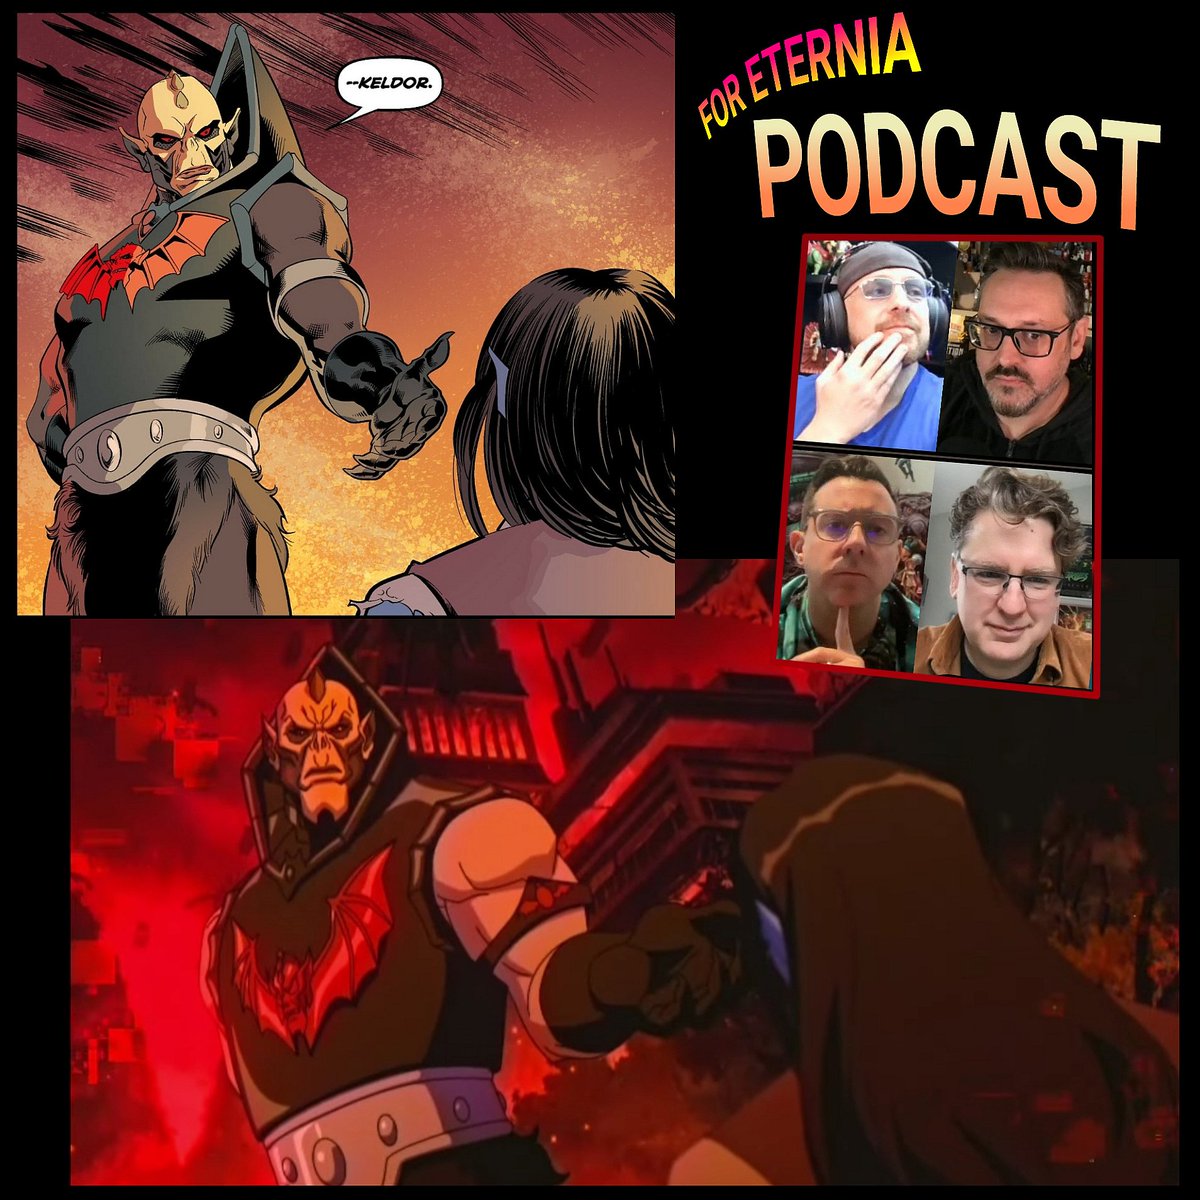 Looking for something to listen to this weekend? Then check out the FOR ETERNIA Podcast where 'Masters of the Universe: Revolution' creators discuss how the new prequel comics delve further into the Hordak & Keldor relationship foreternia.com/2024/05/my-nam… #MastersoftheUniverse #MOTU